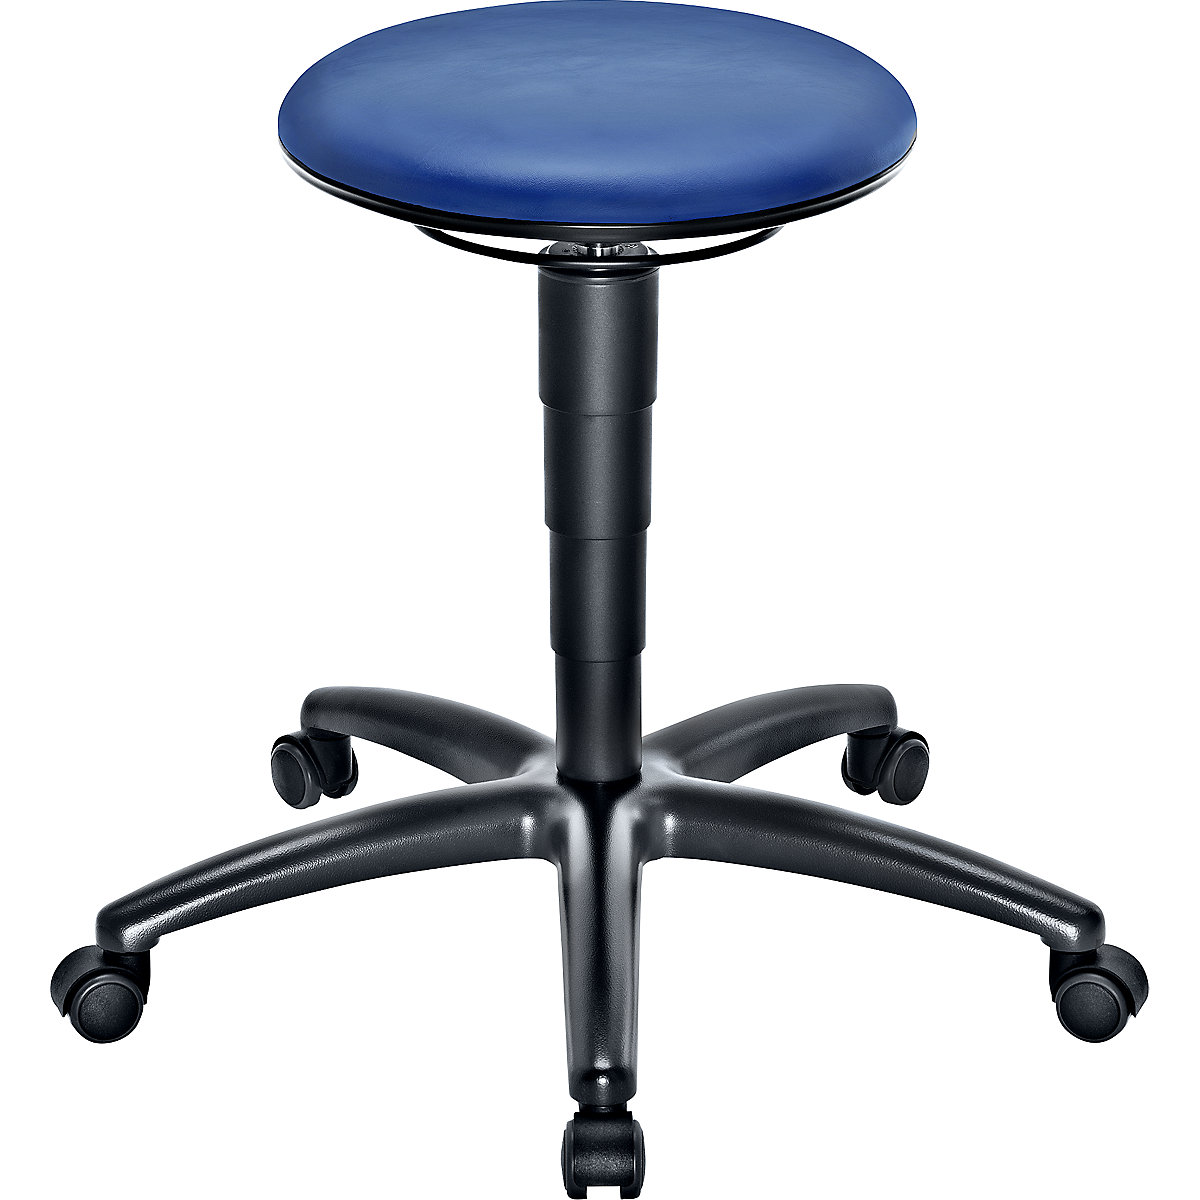 Industrial stool with gas lift height adjustment – eurokraft pro, blue vinyl seat, with castors-1